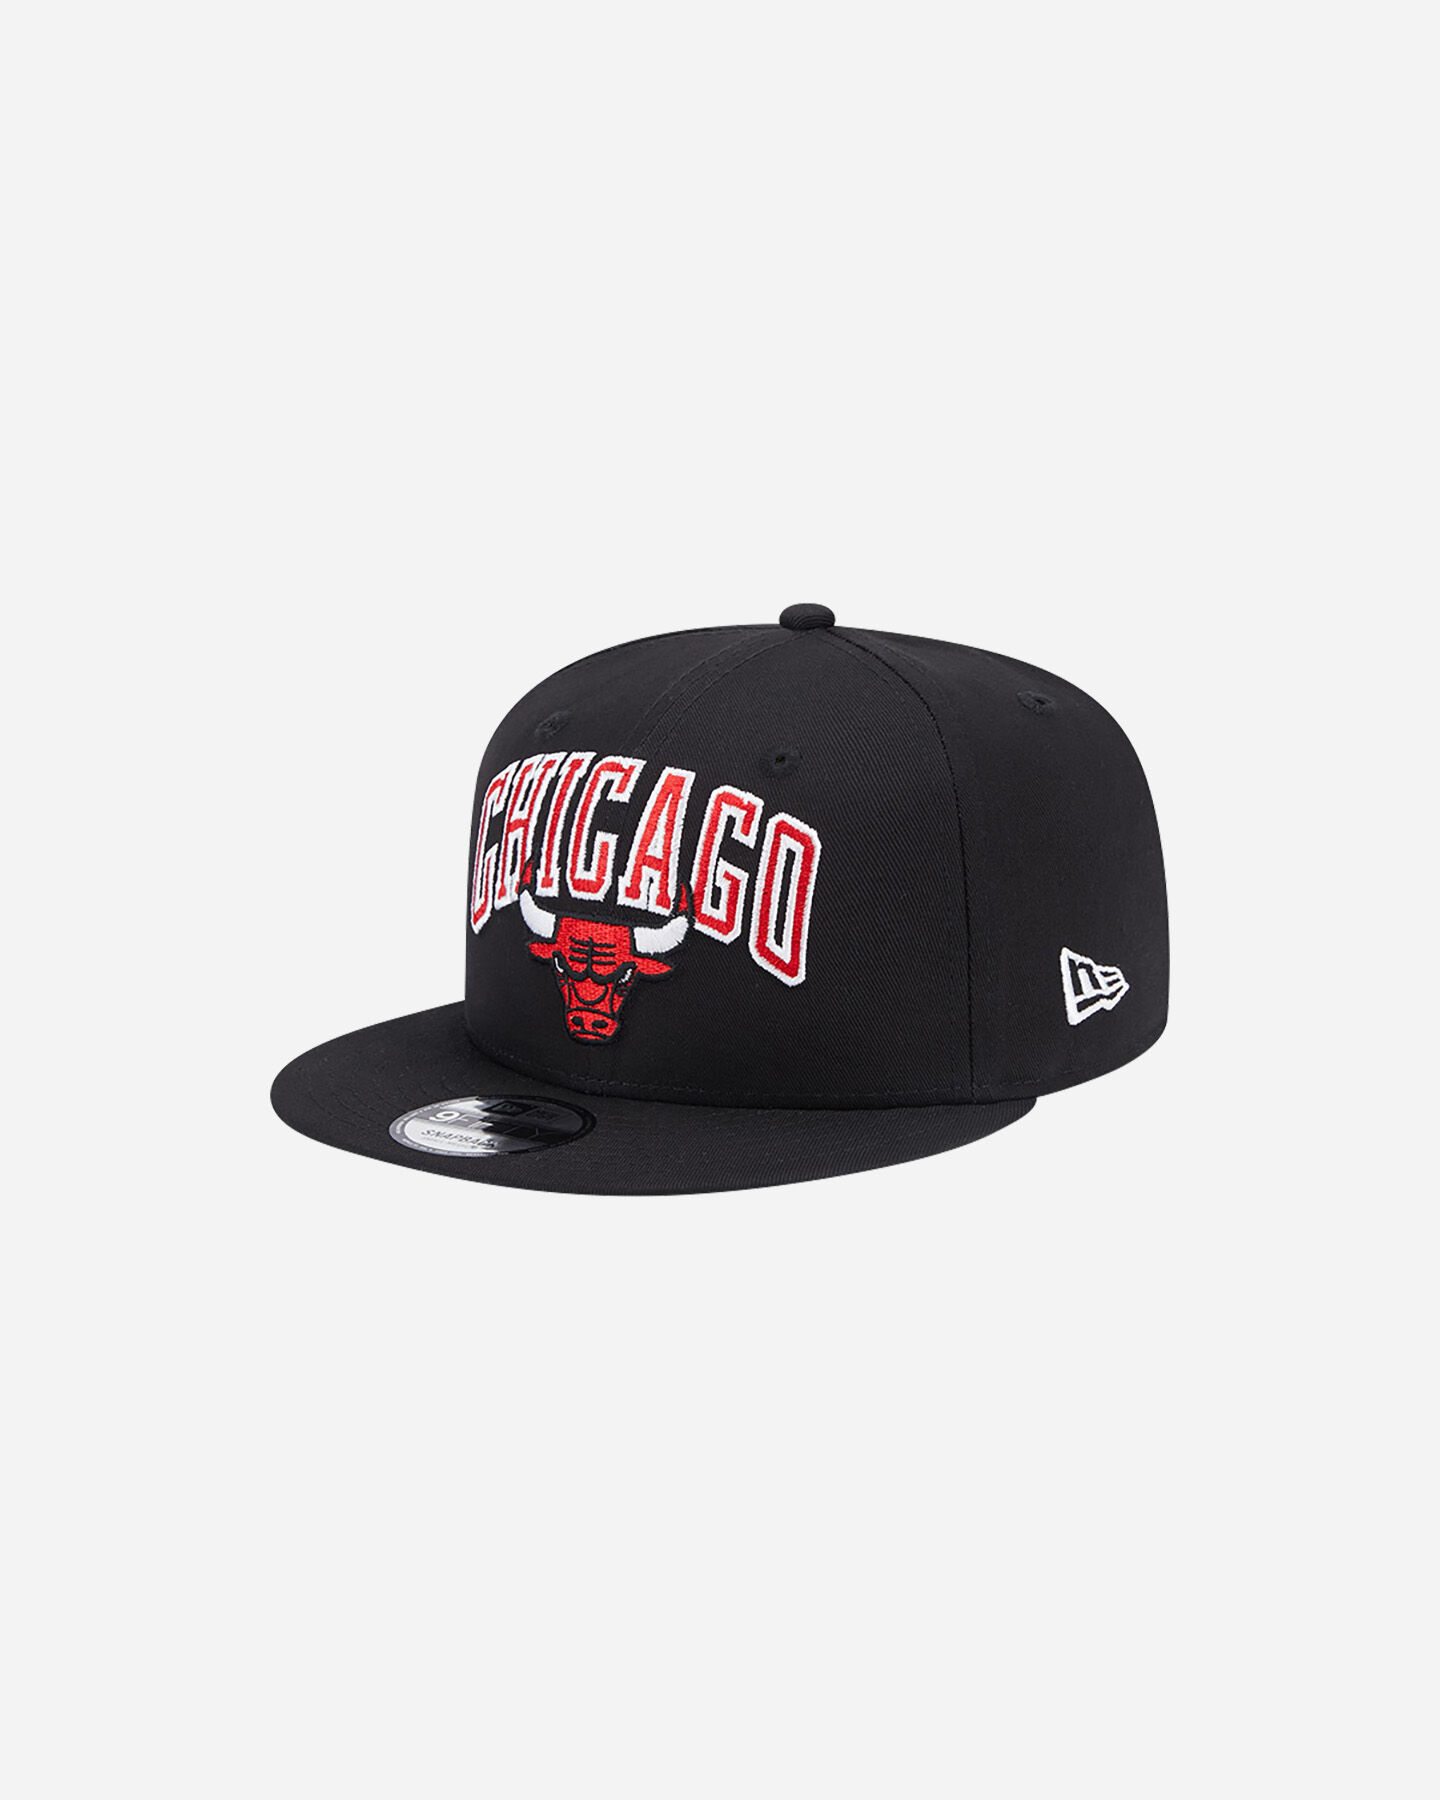  Cappellino NEW ERA 9FIFTY PATCH CHICAGO BULLS  S5606098|001|SM scatto 0